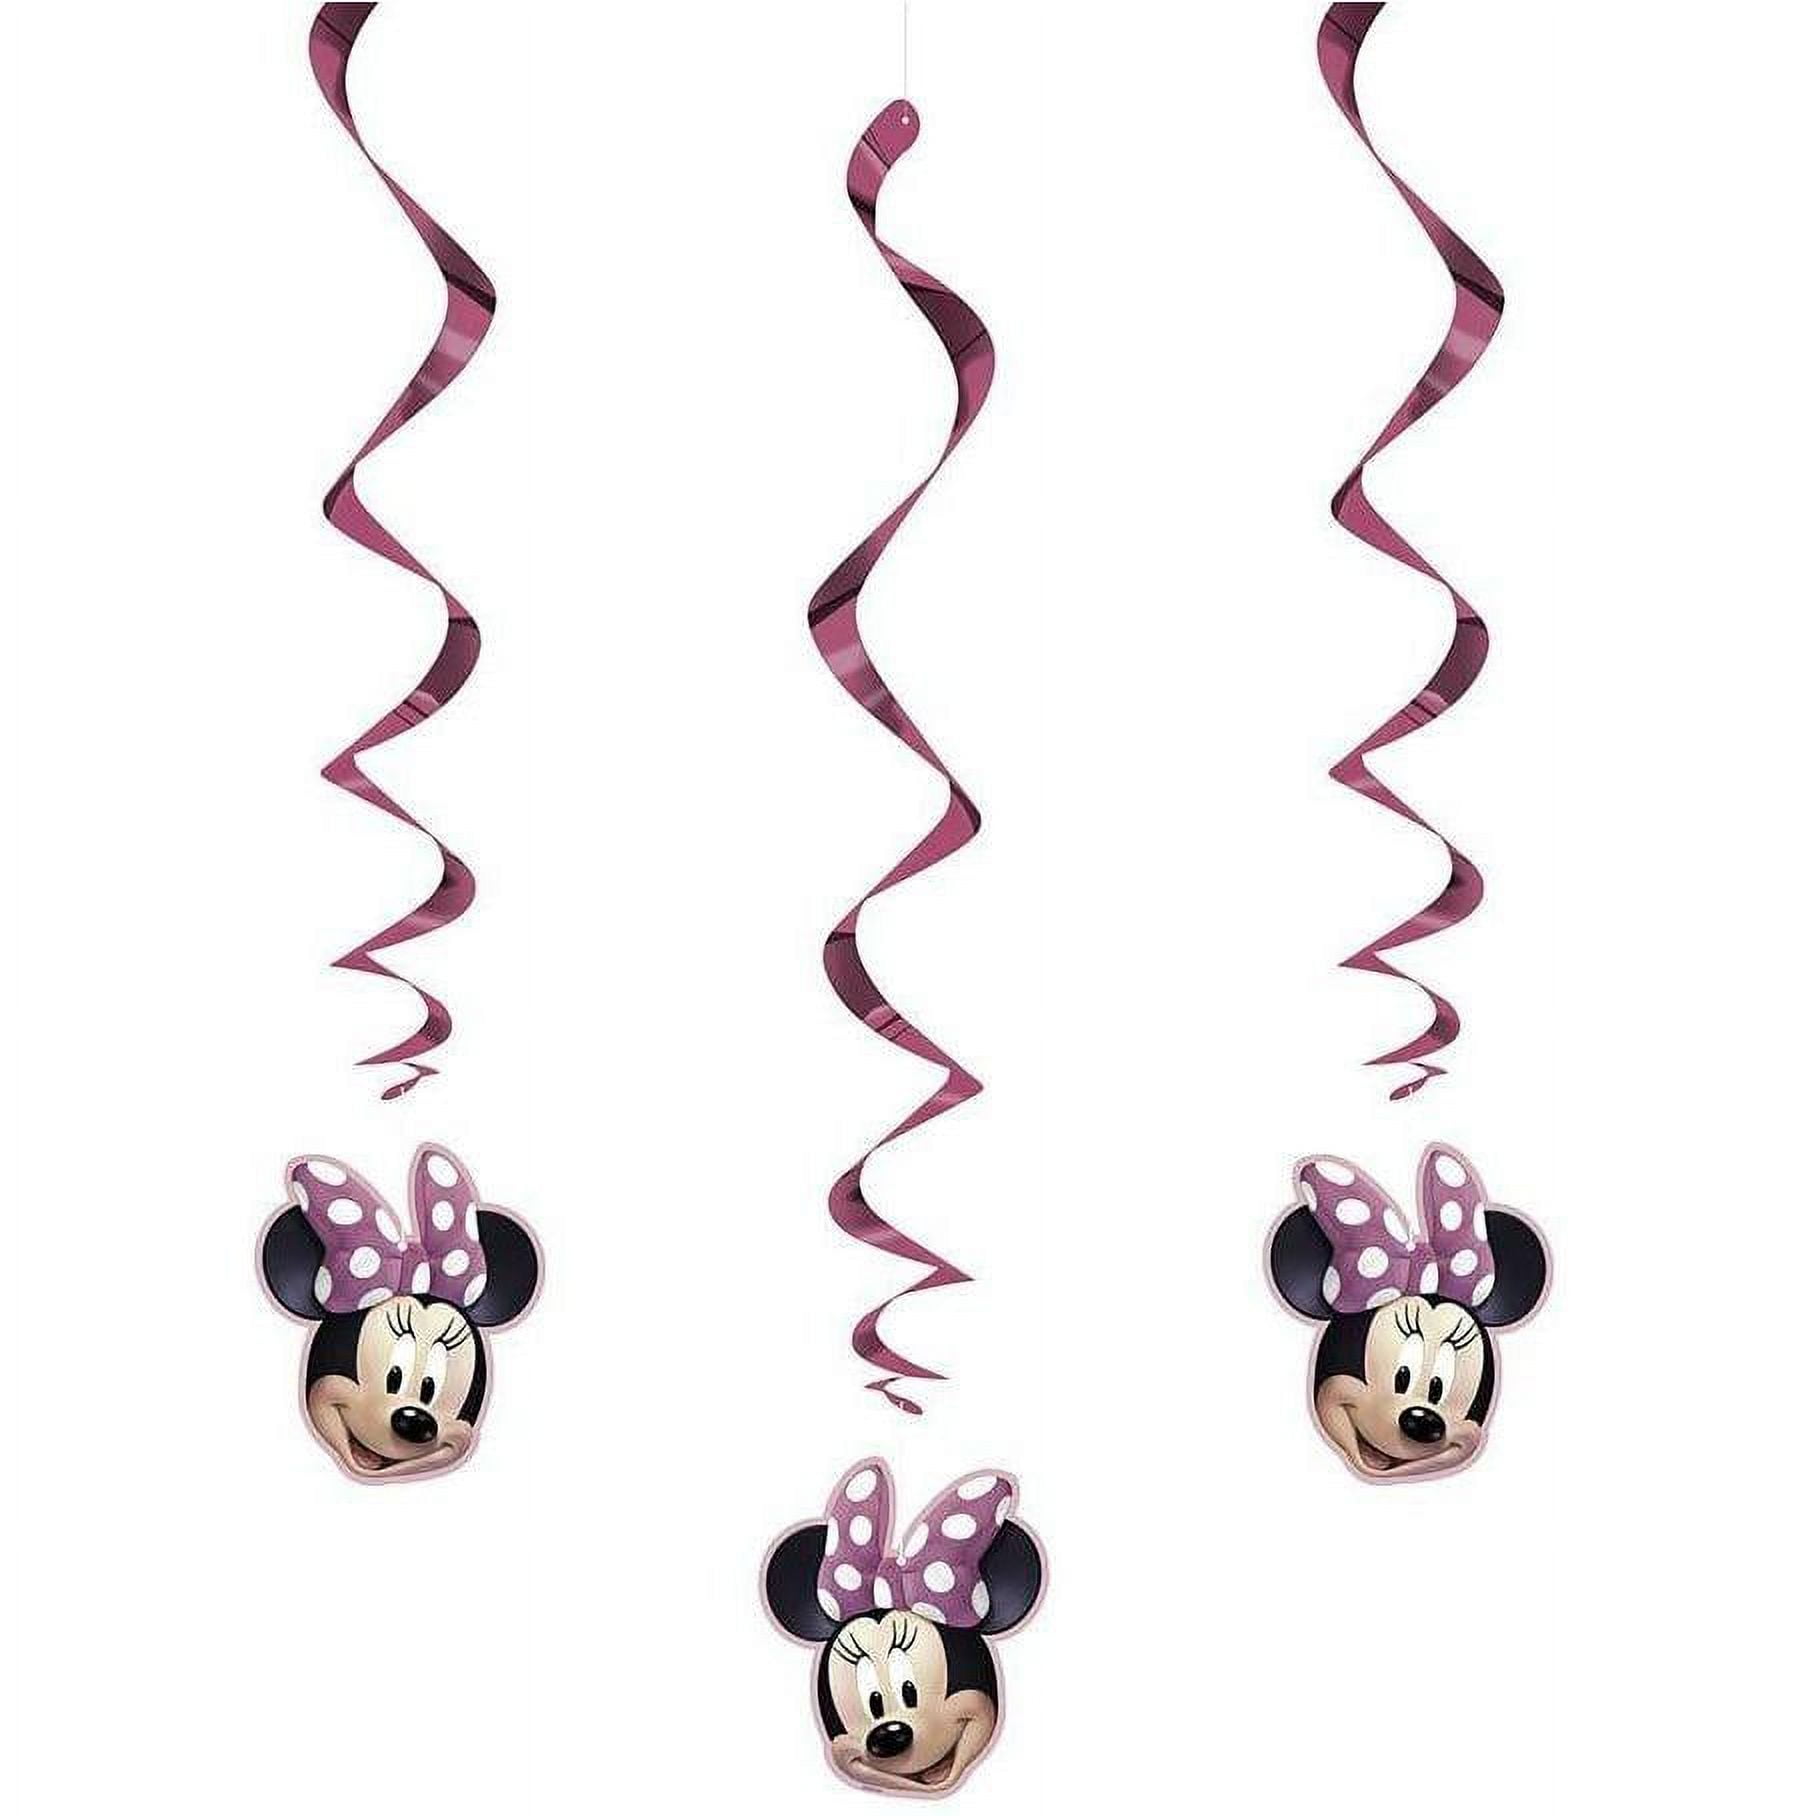 30pcs Mickey Mouse Birthday Hanging Swirl Decorations, Ceiling Streamers  Mini Mouse Birthday Party Supplies, Hanging Swirls Party Favors for Kids  Boys